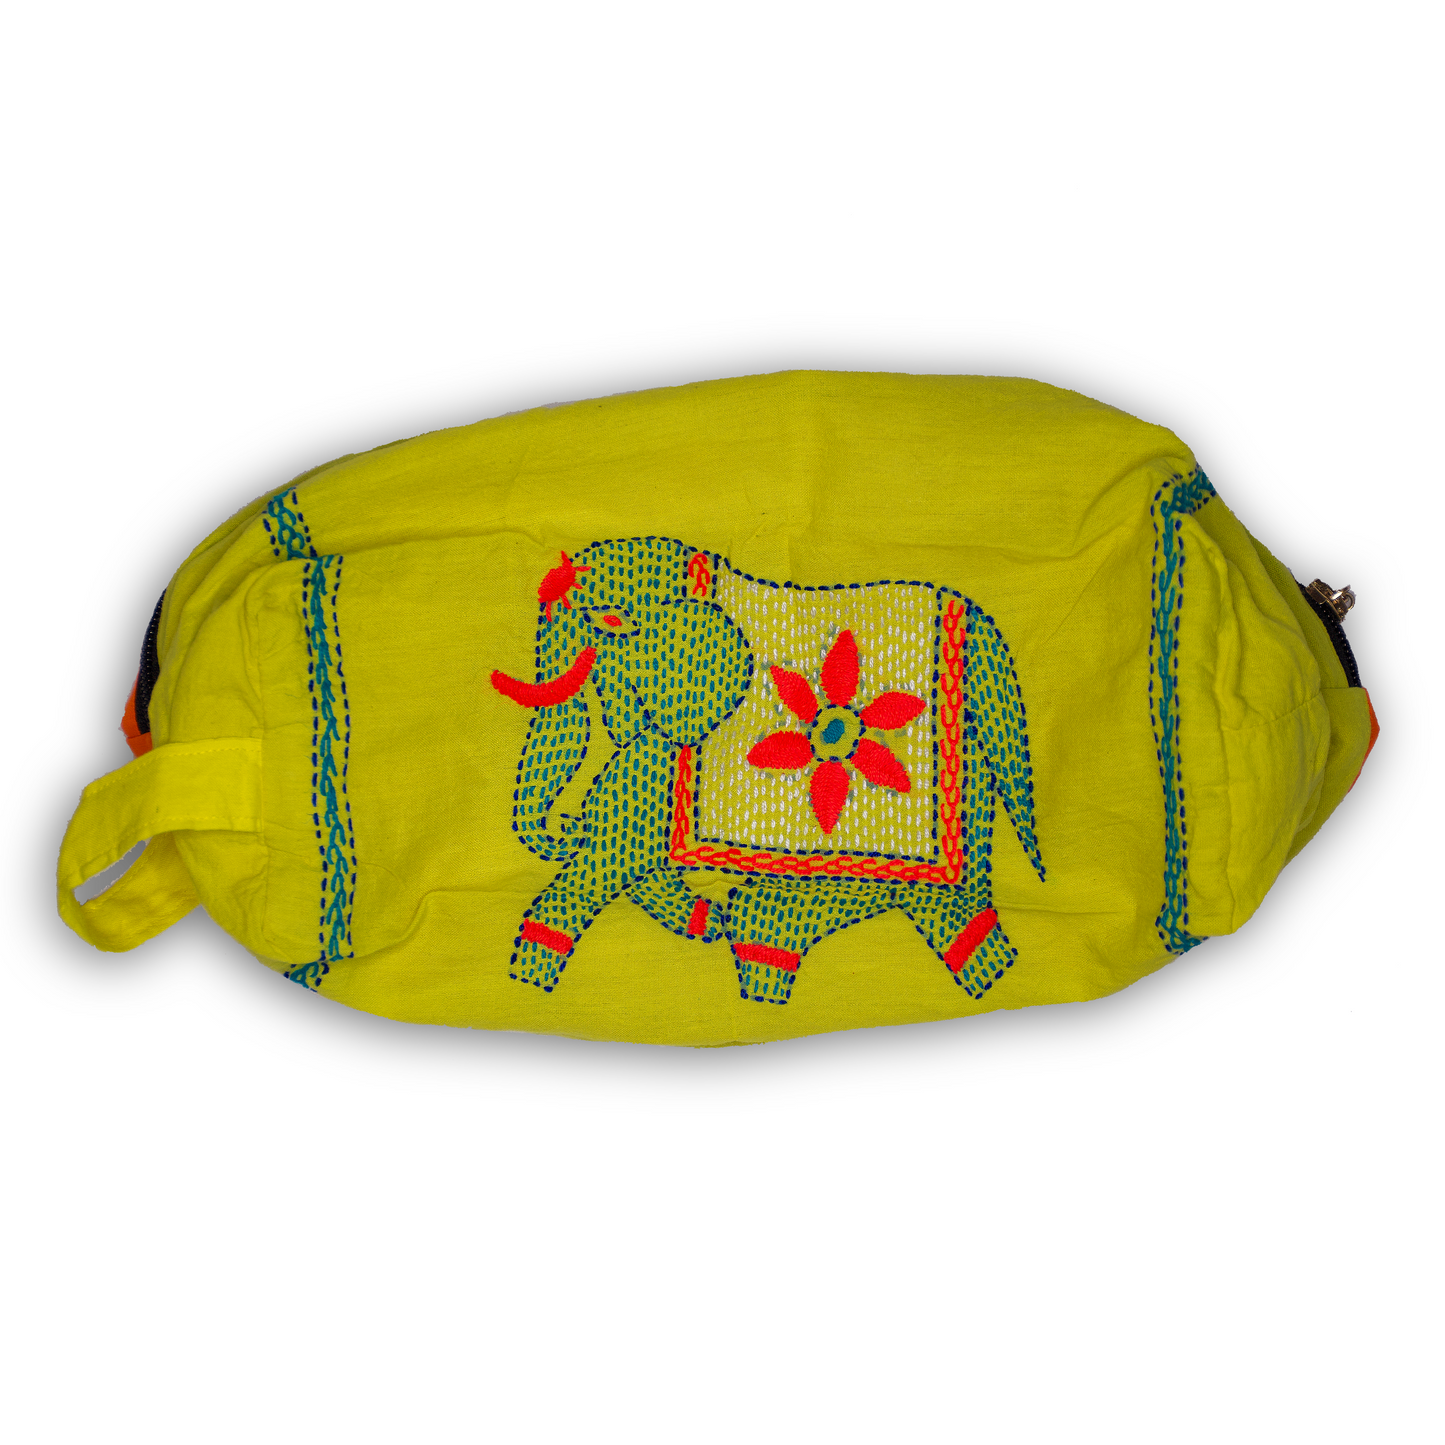 Yellow pouch bag with elephant design stitched on the side including orange and blue thread in design